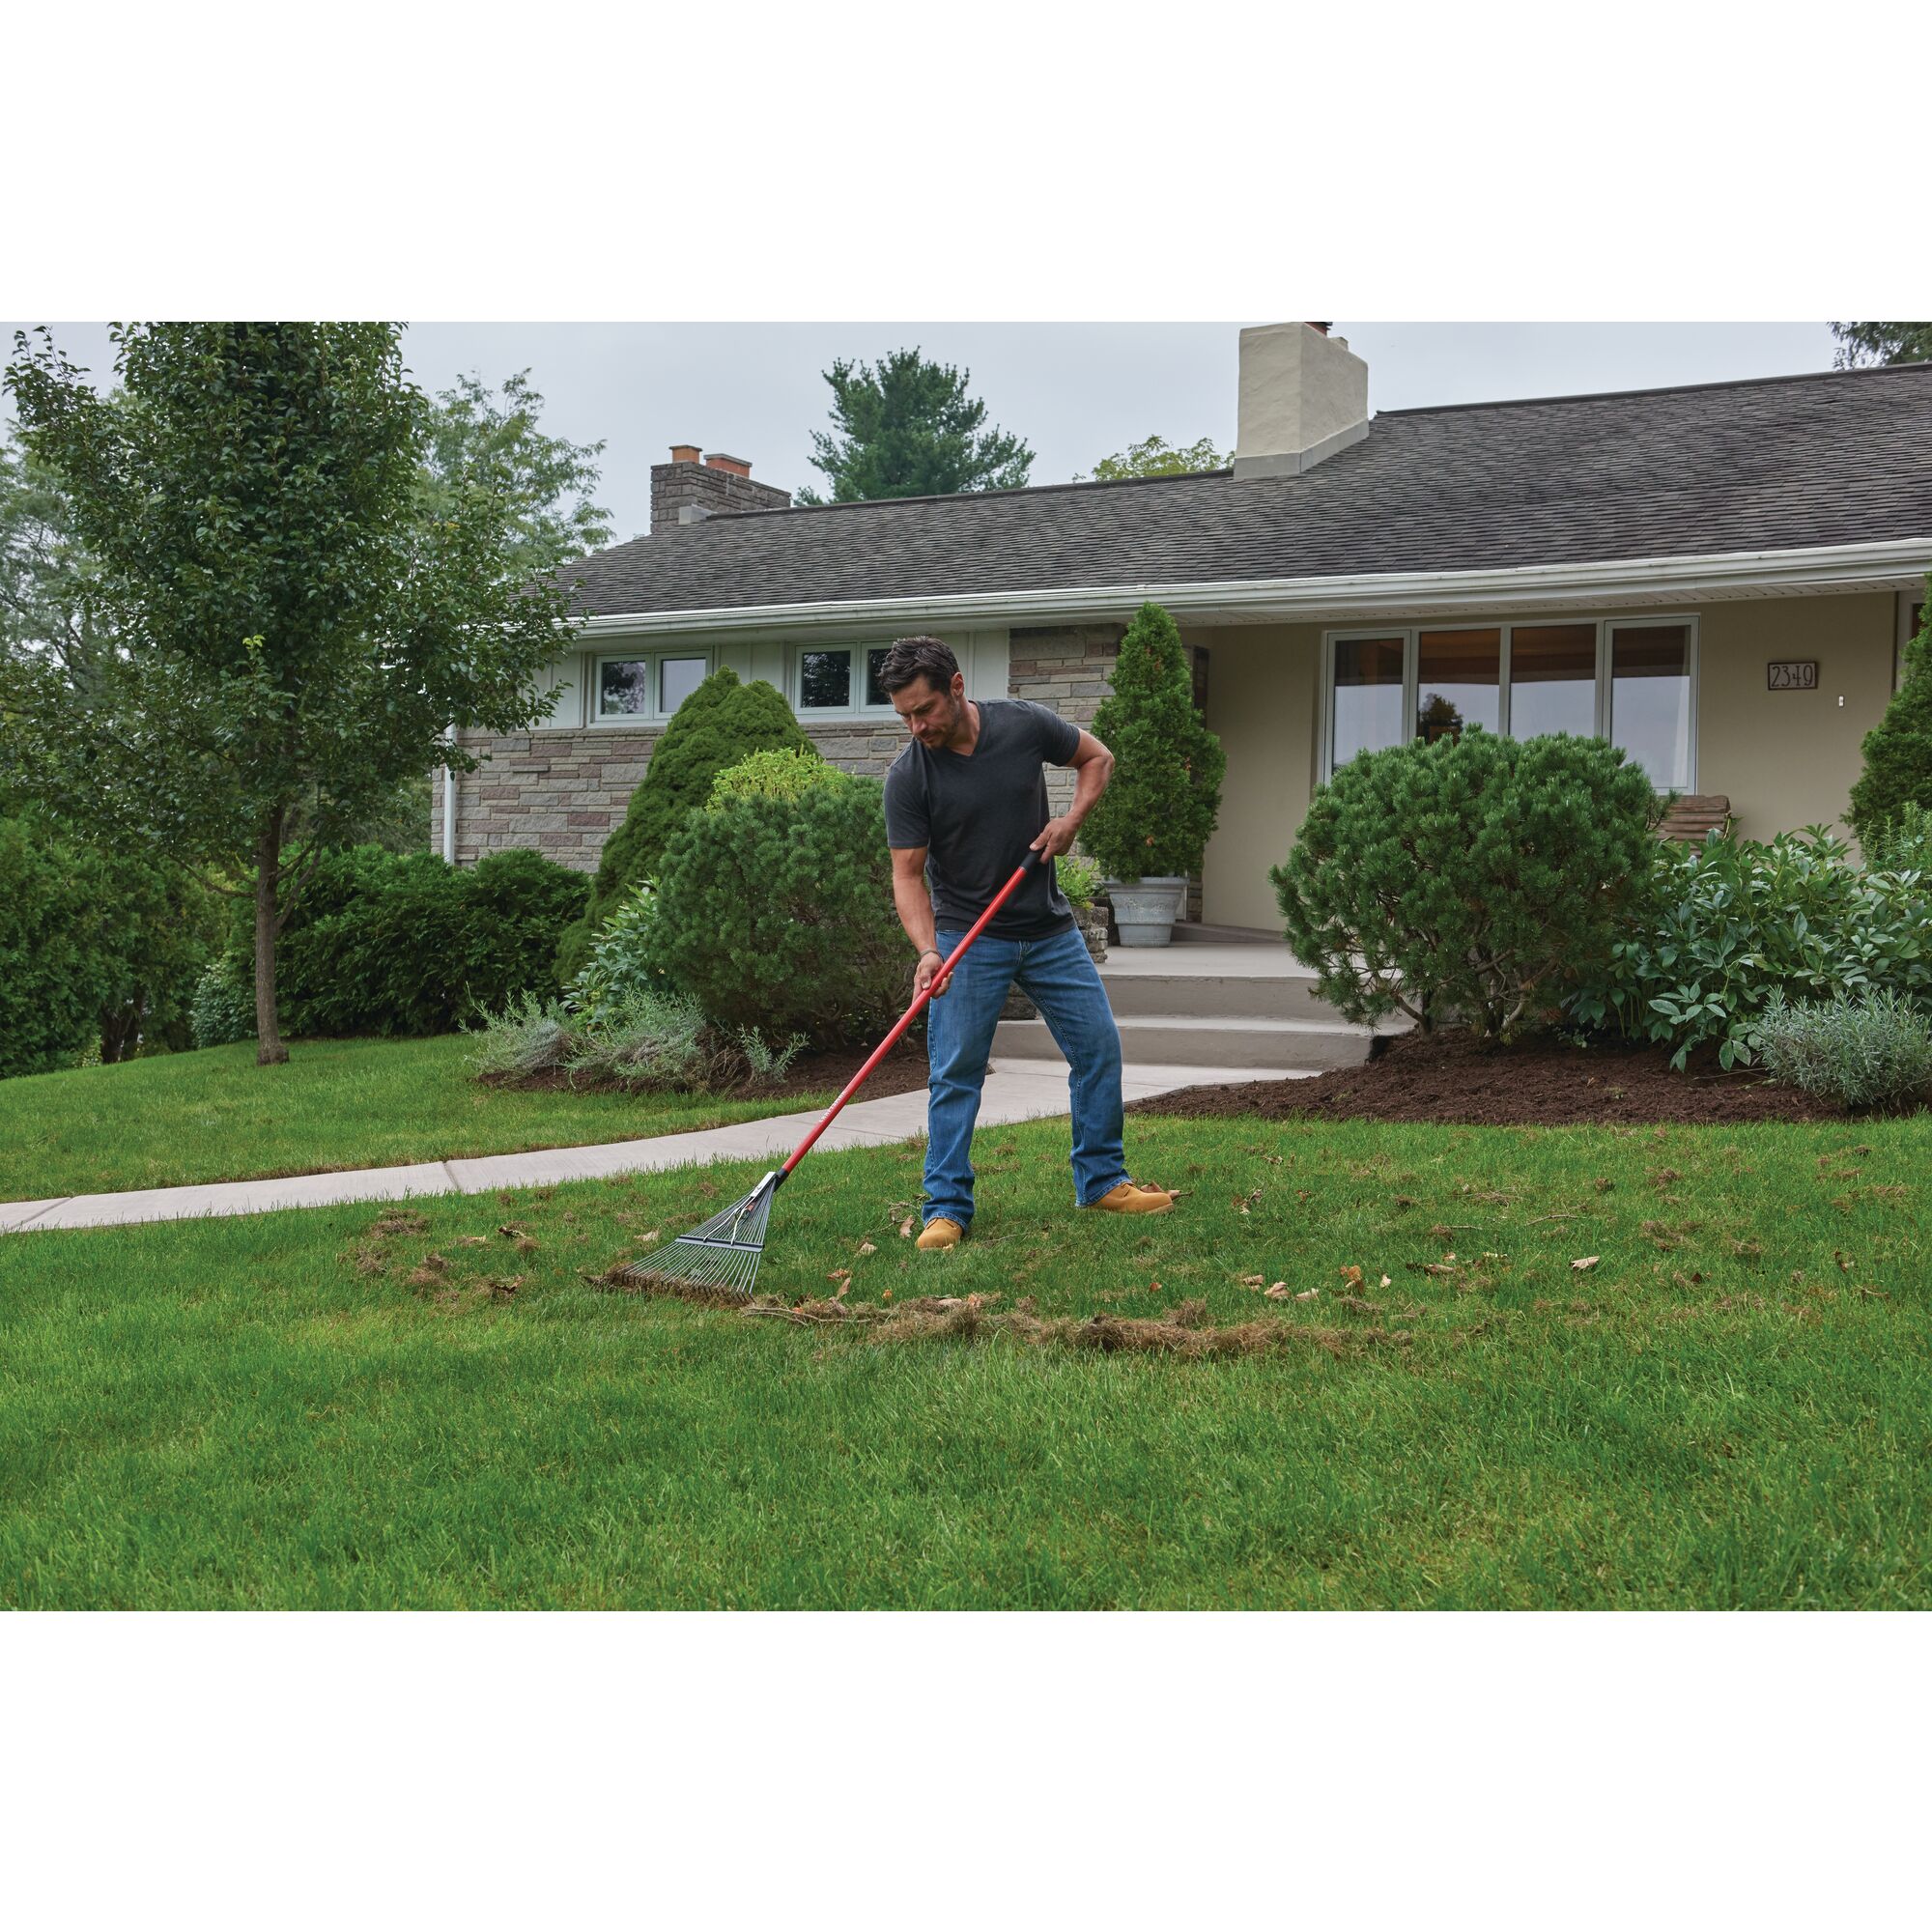 24 inch tine fiberglass handle lawn rake being used by a person.